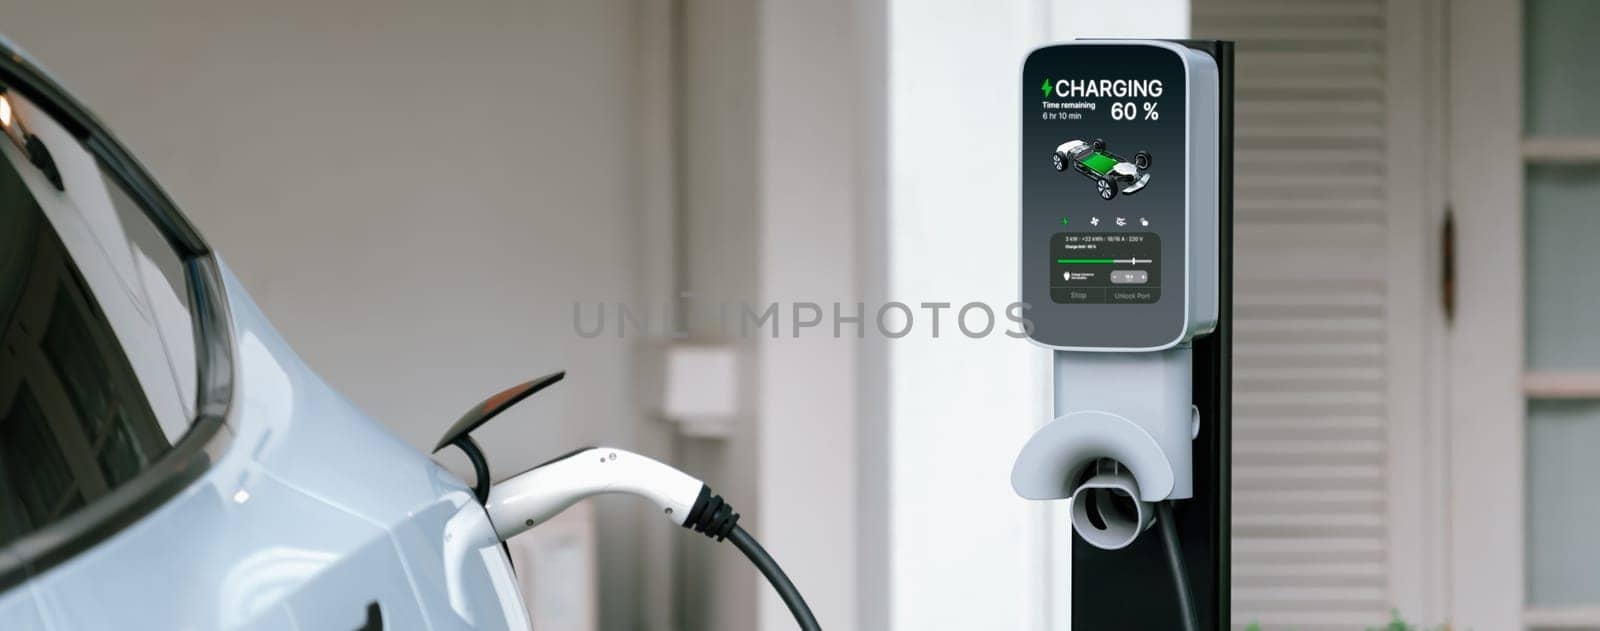 Electric vehicle technology utilized to home charging station. Synchronos by biancoblue